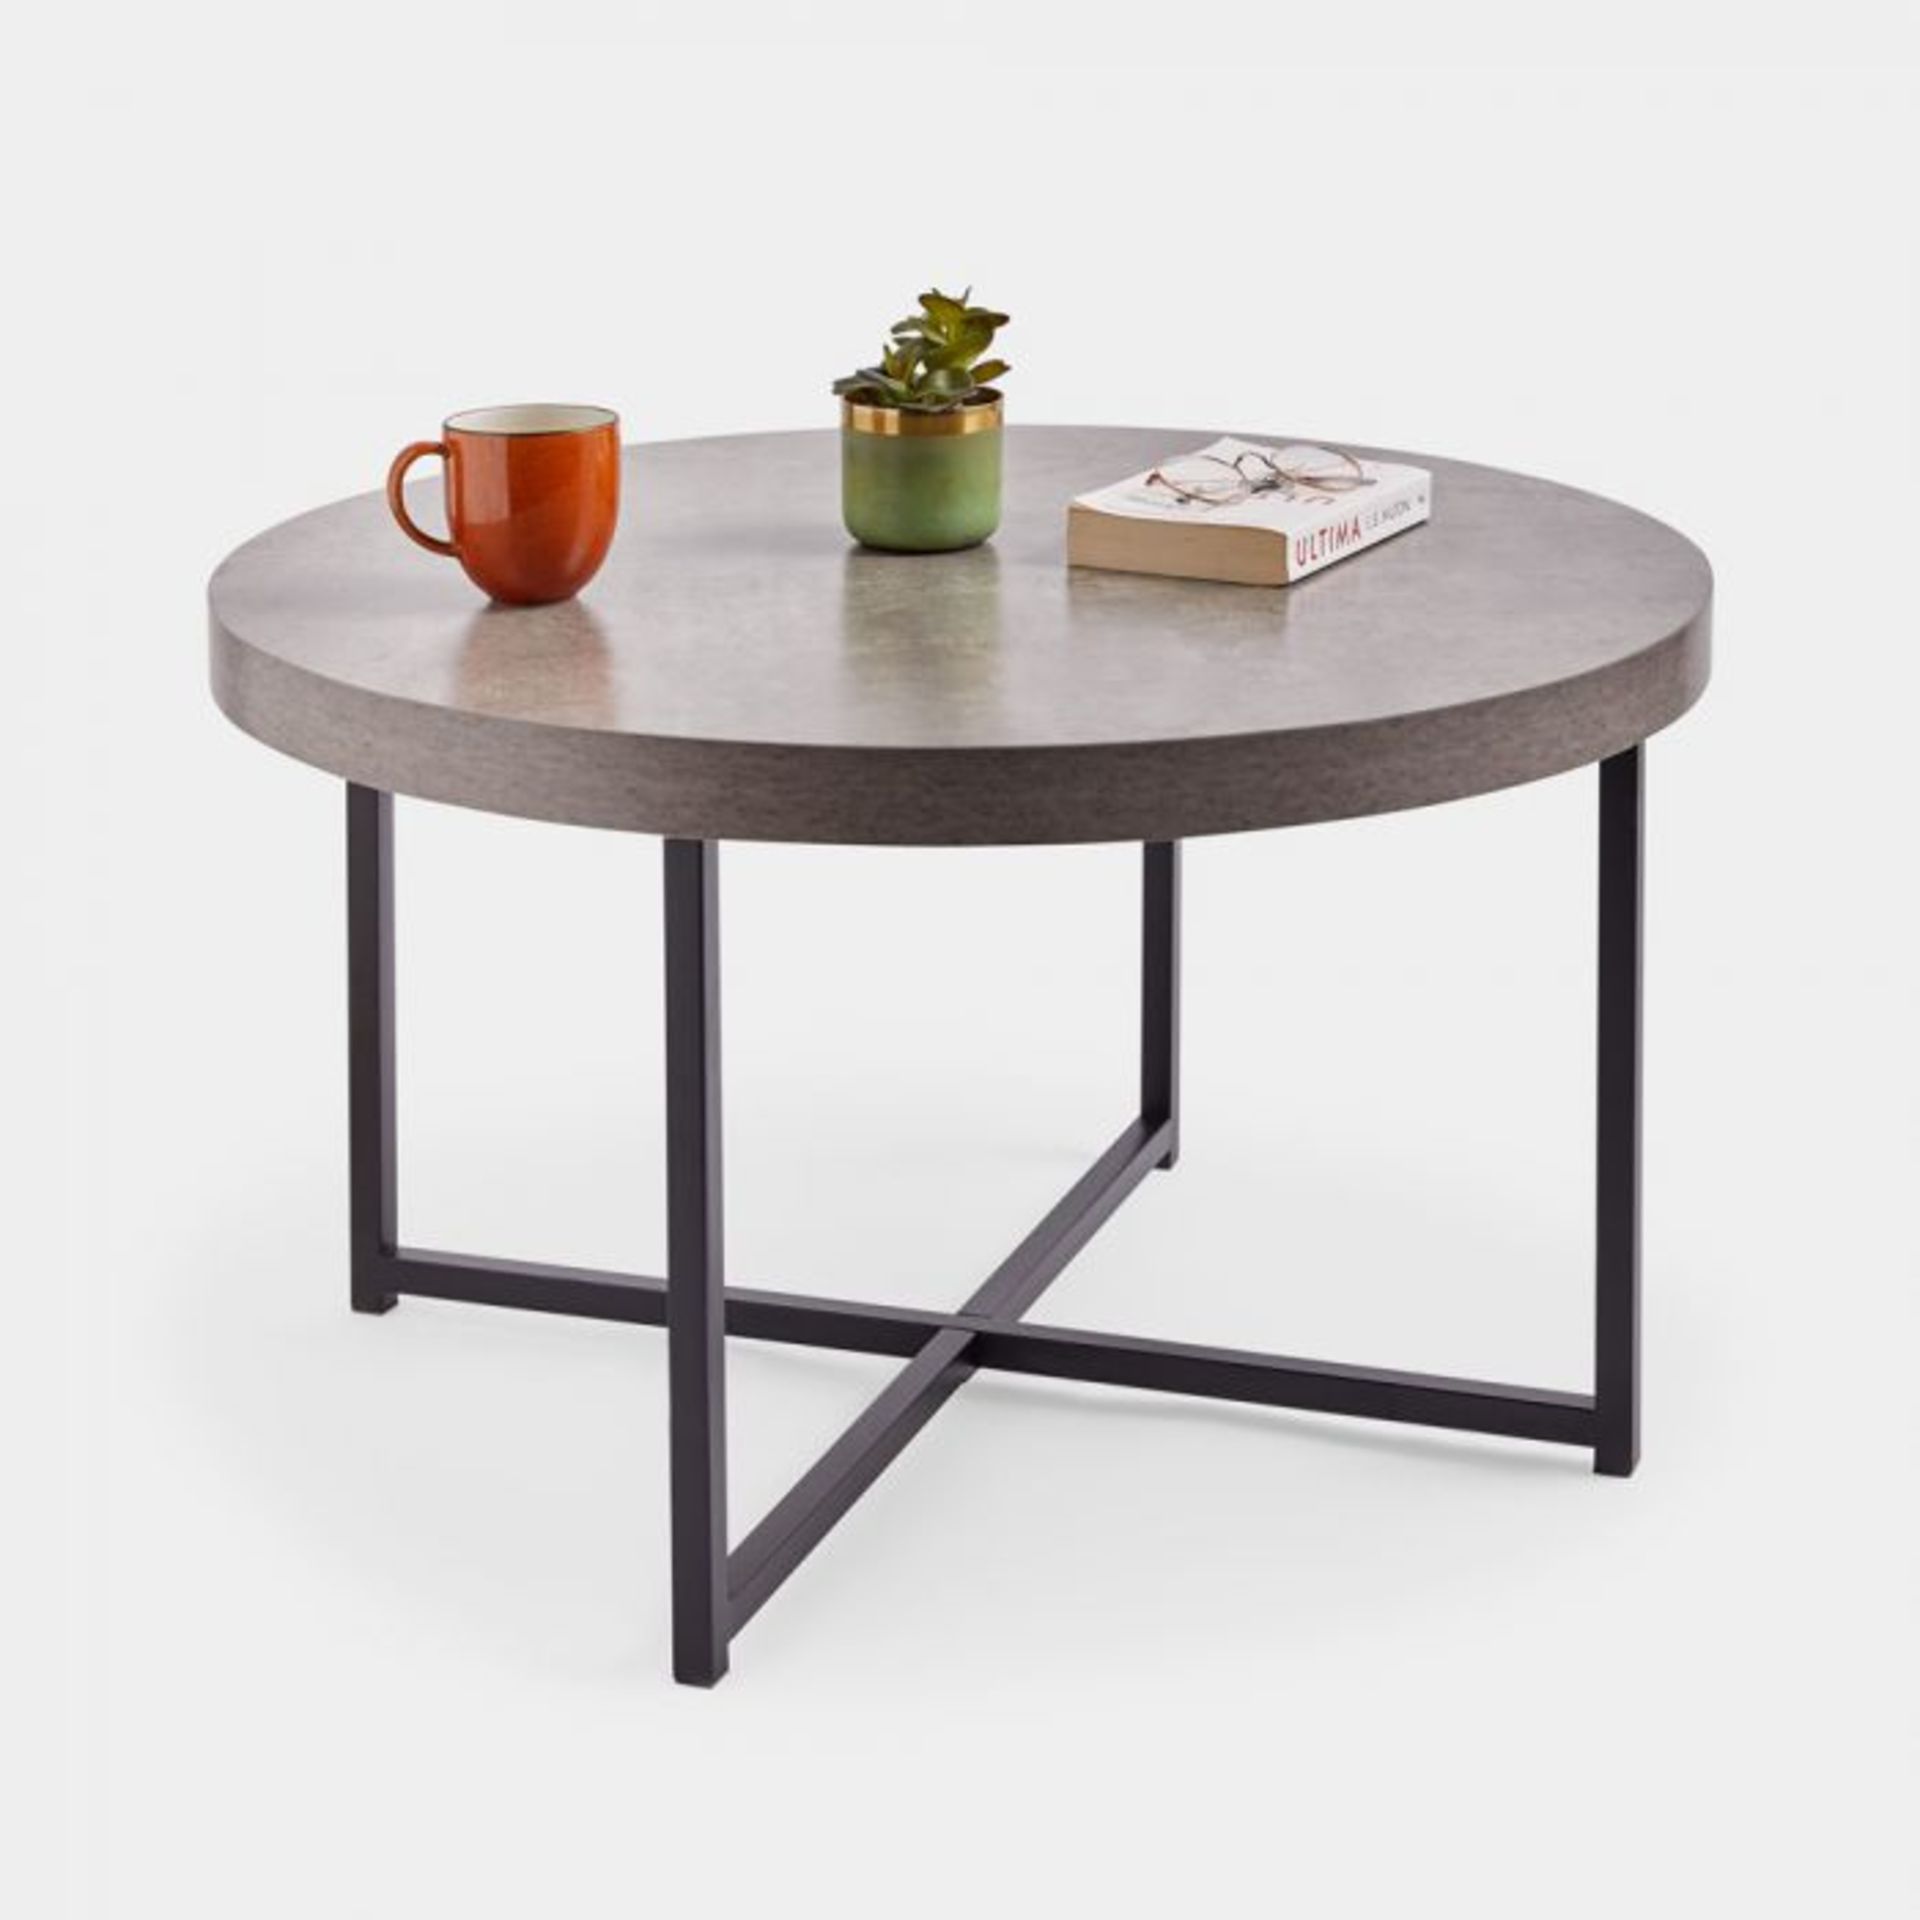 Concrete Effect Coffee Table. Industrial, urban style with lightweight construction – this VonHaus